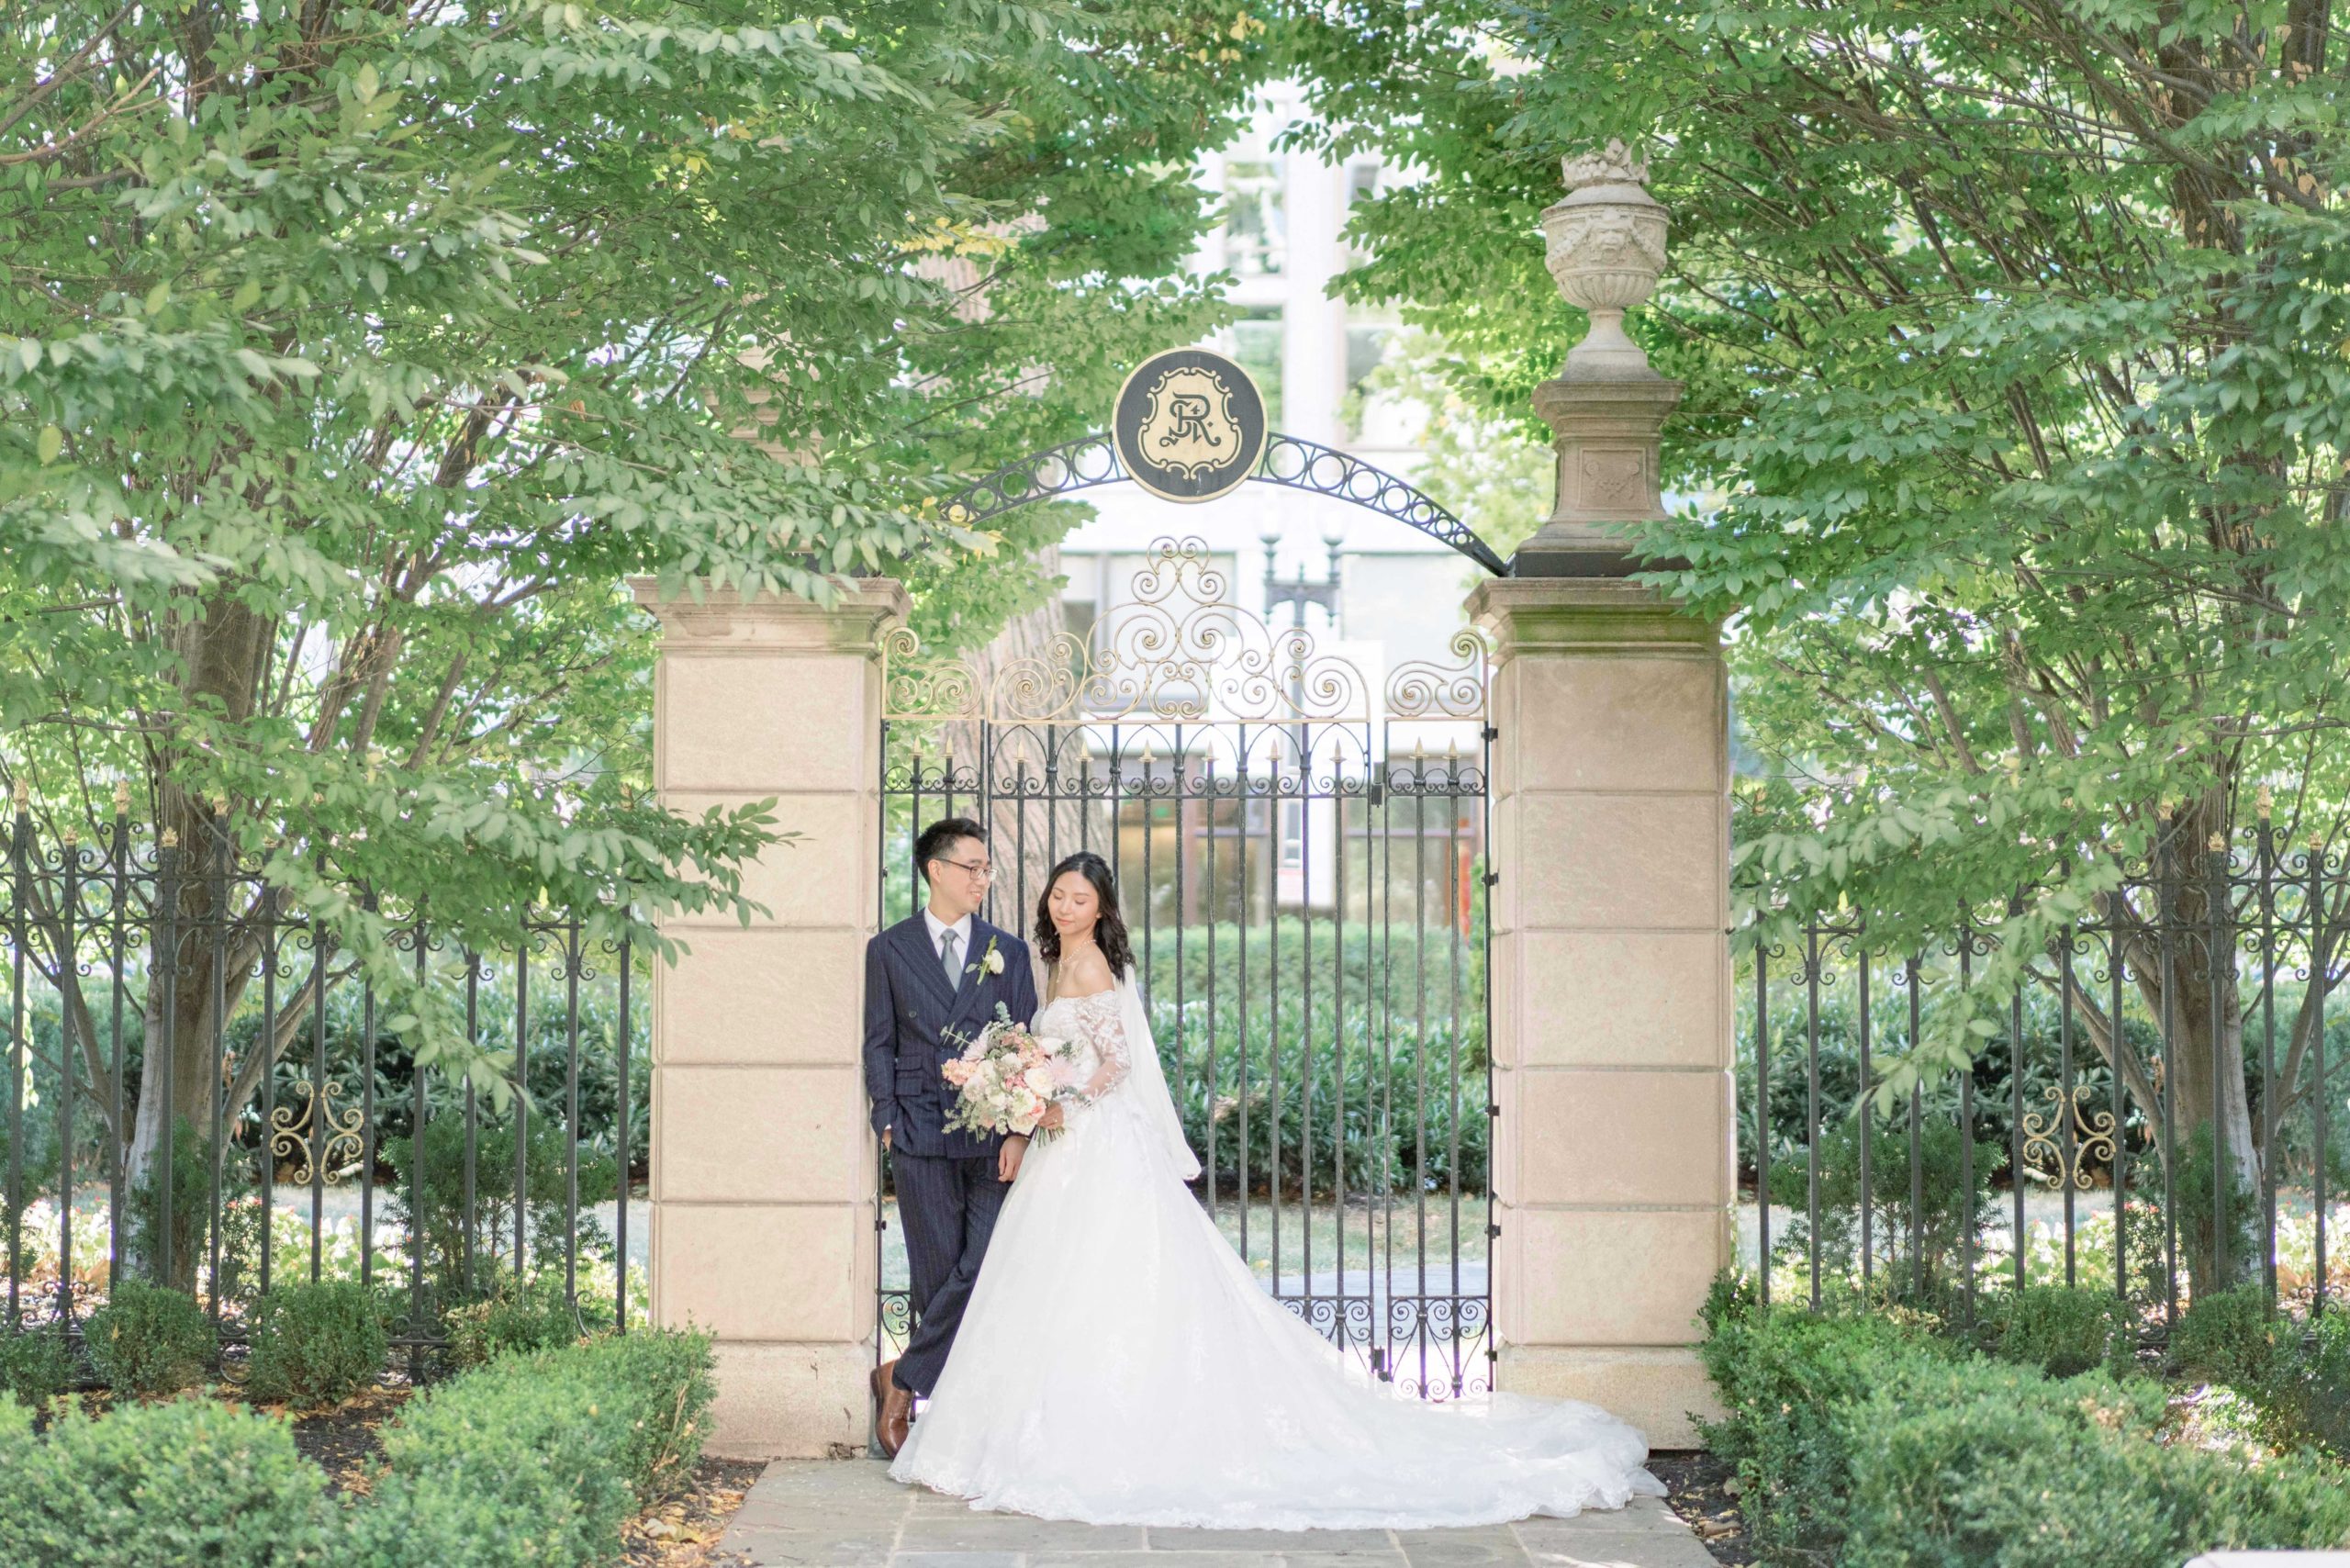 A elegant wedding on the Astor Terrace at the St. Regis Hotel in downtown Washington, DC.